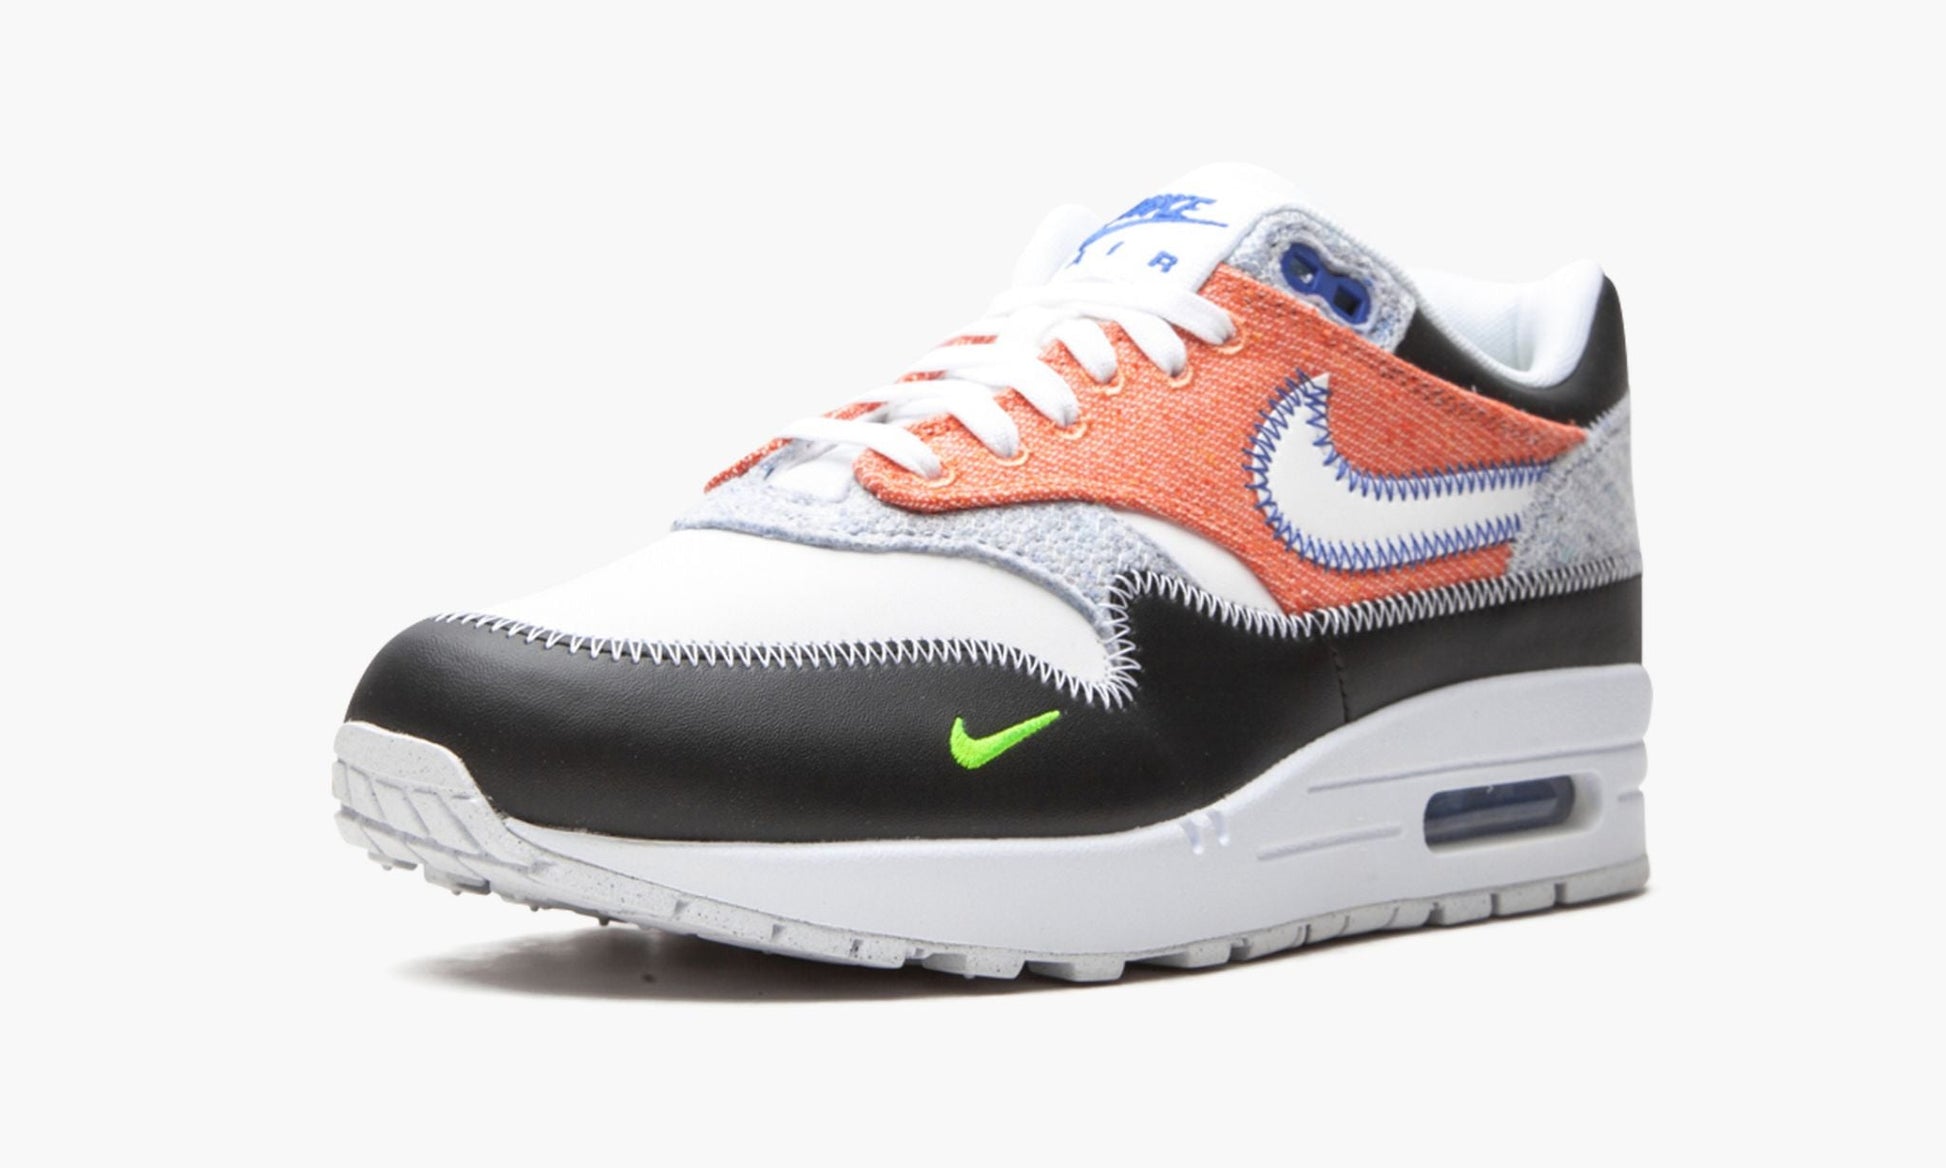 Nike Air Max 1 "Recycled"